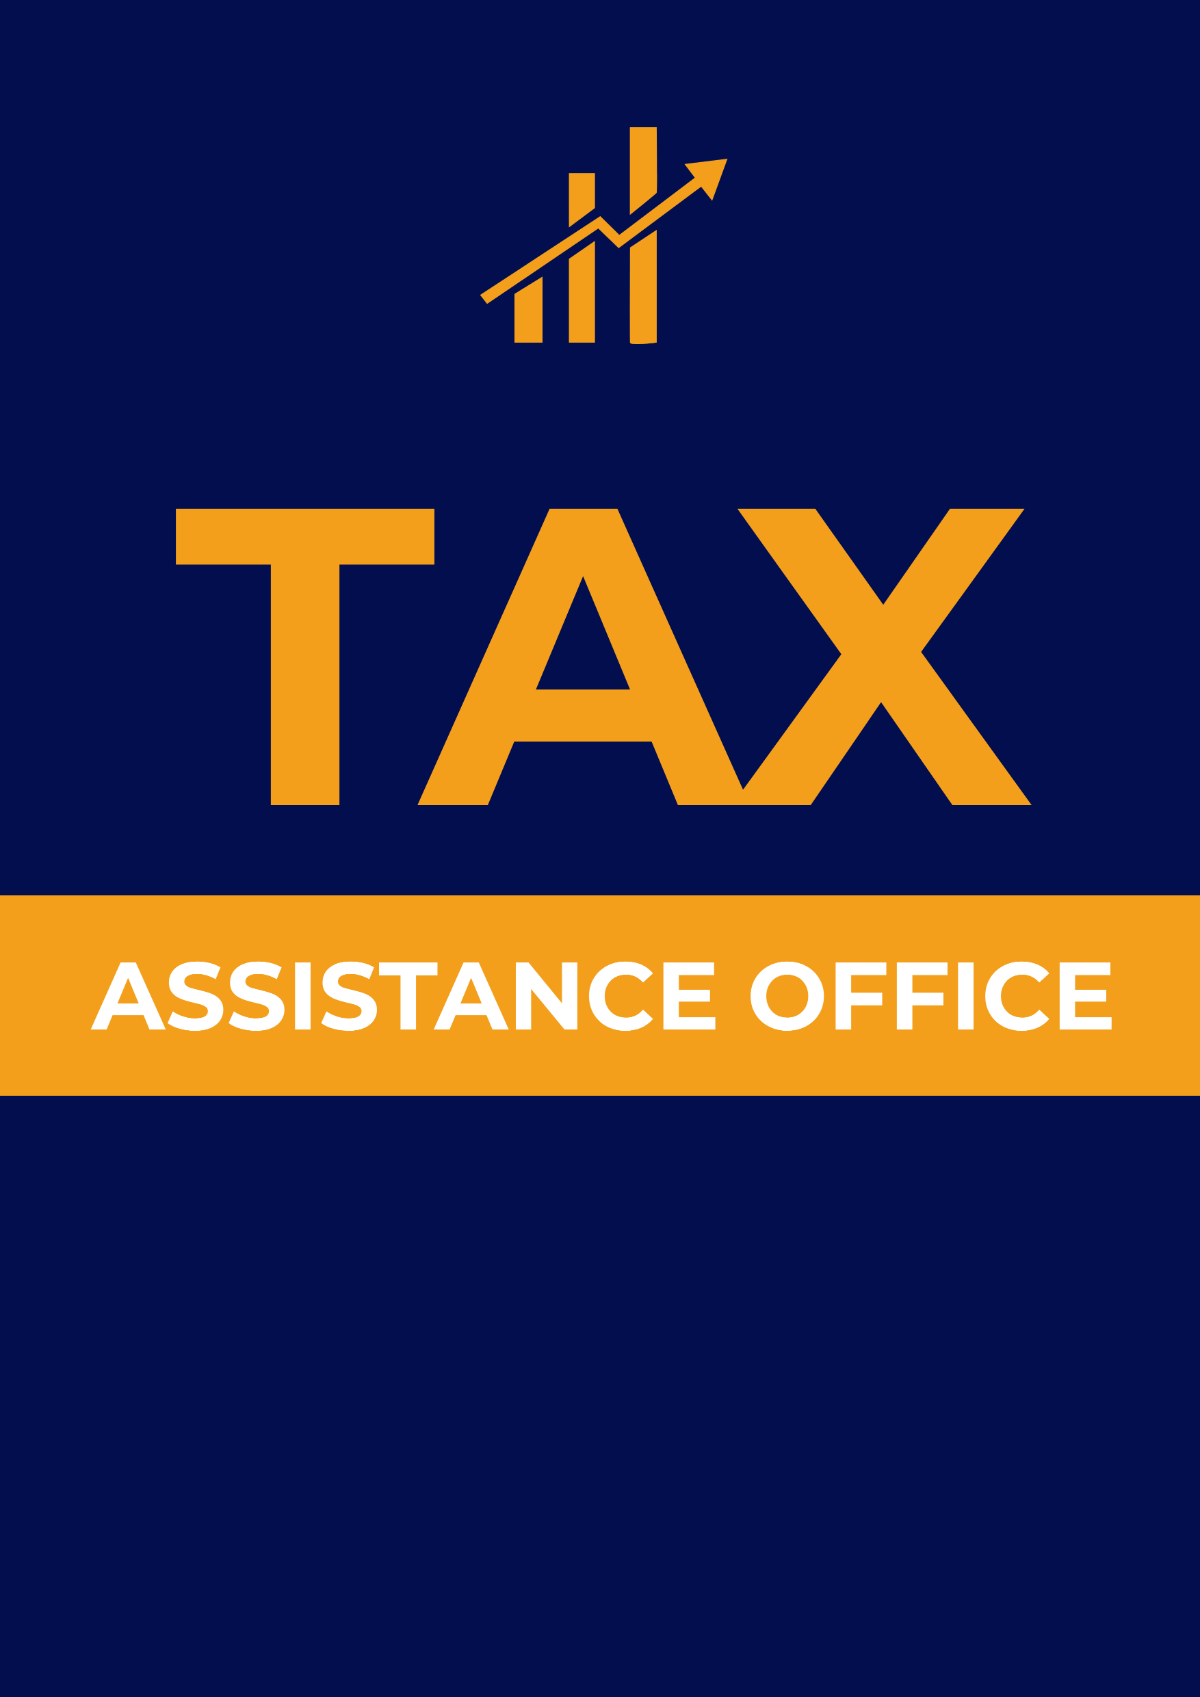 Tax Assistance Office Signage Template